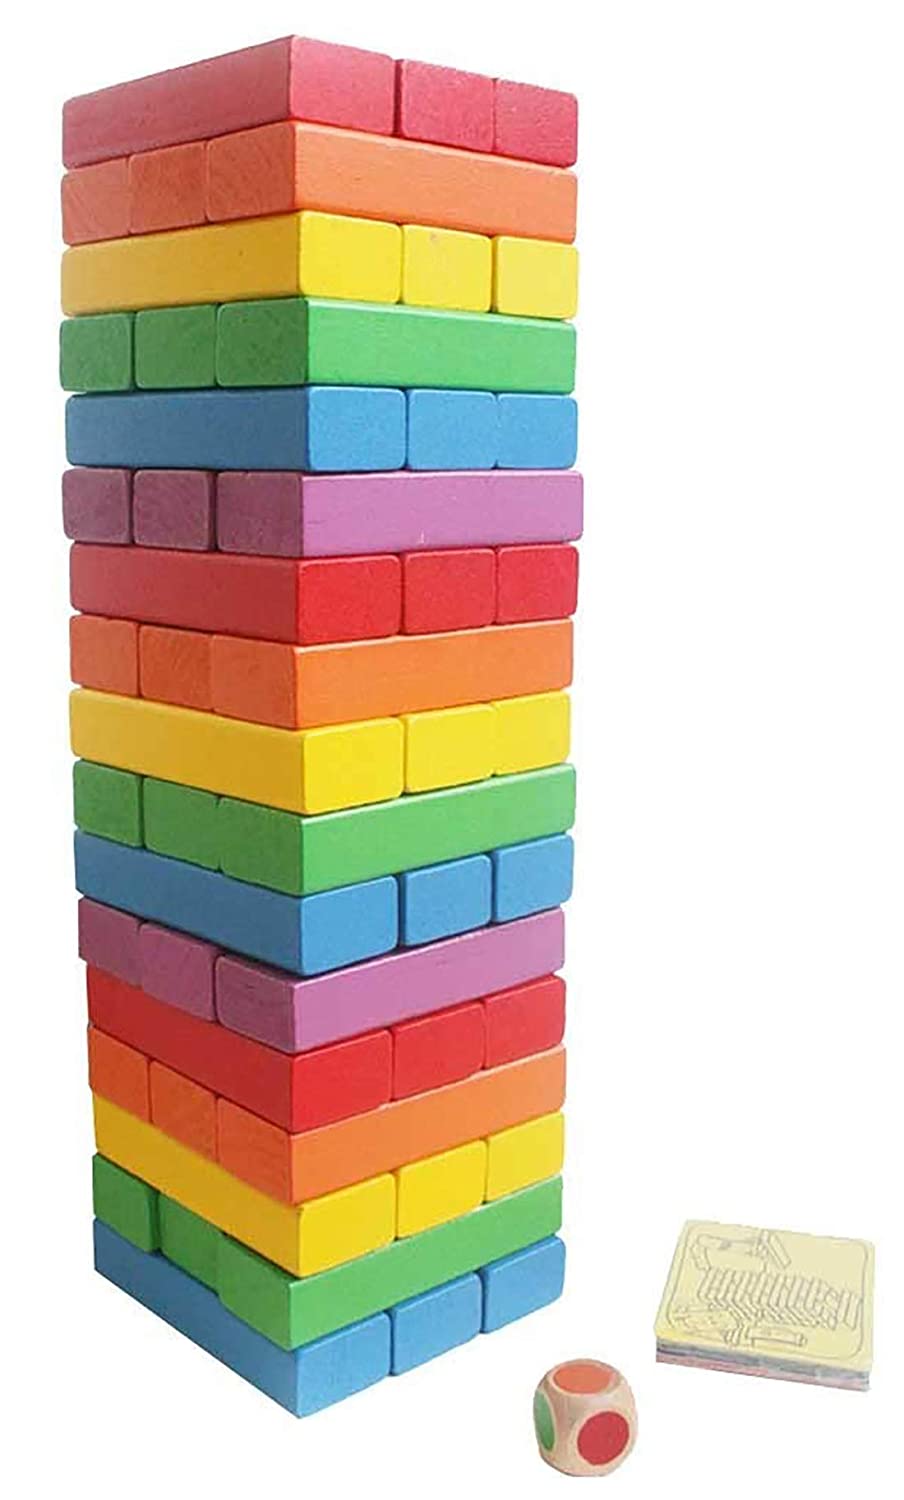 Webby for Adult's Wooden Colorful Building Blocks Educational Game Toy - 48 Pieces